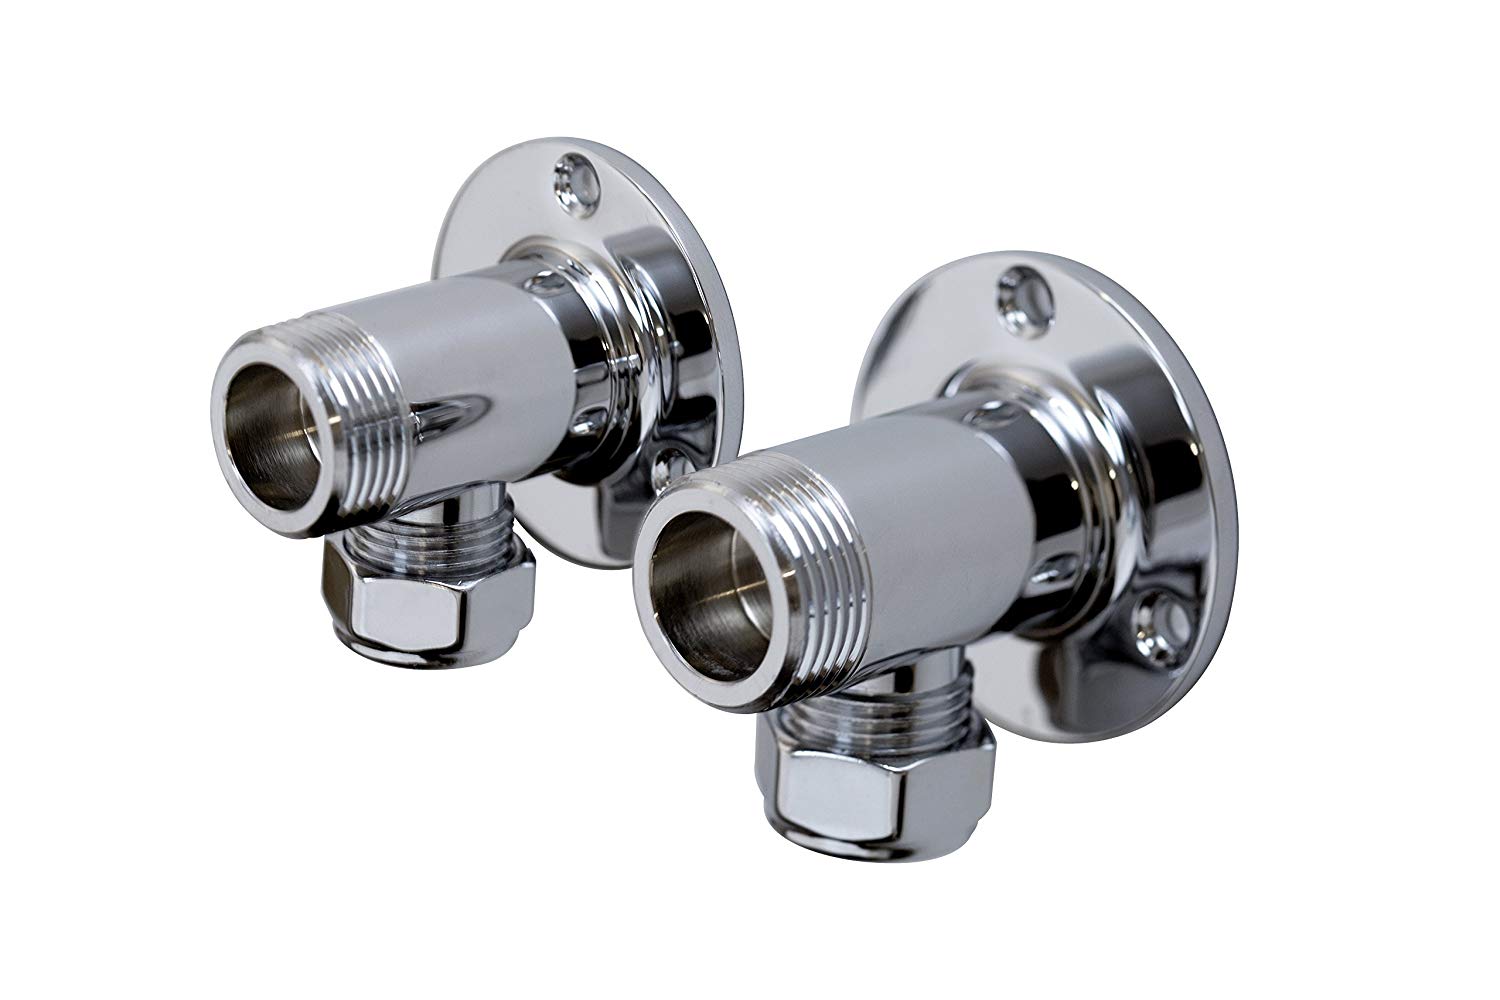 Bristan WMNT4 C Surface Mounted Pipework Fittings - Chrome Plated